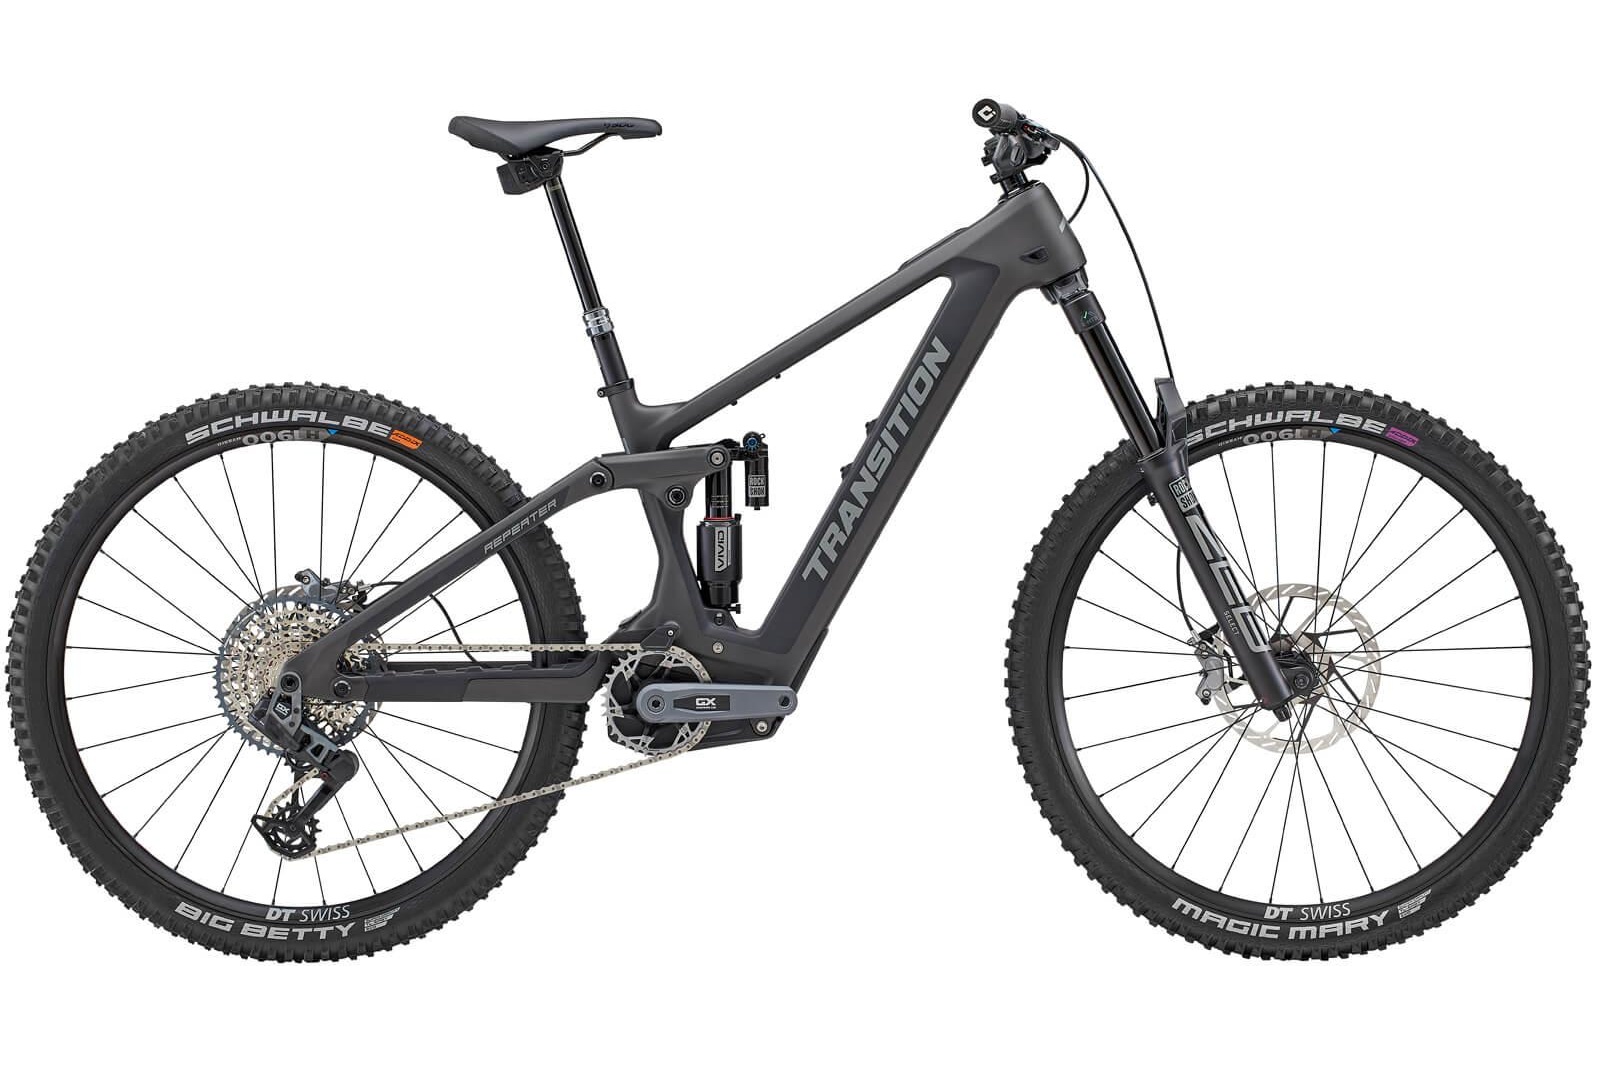 Transition Repeater Carbon GX axsTransition Repeater Carbon GX axs im Test